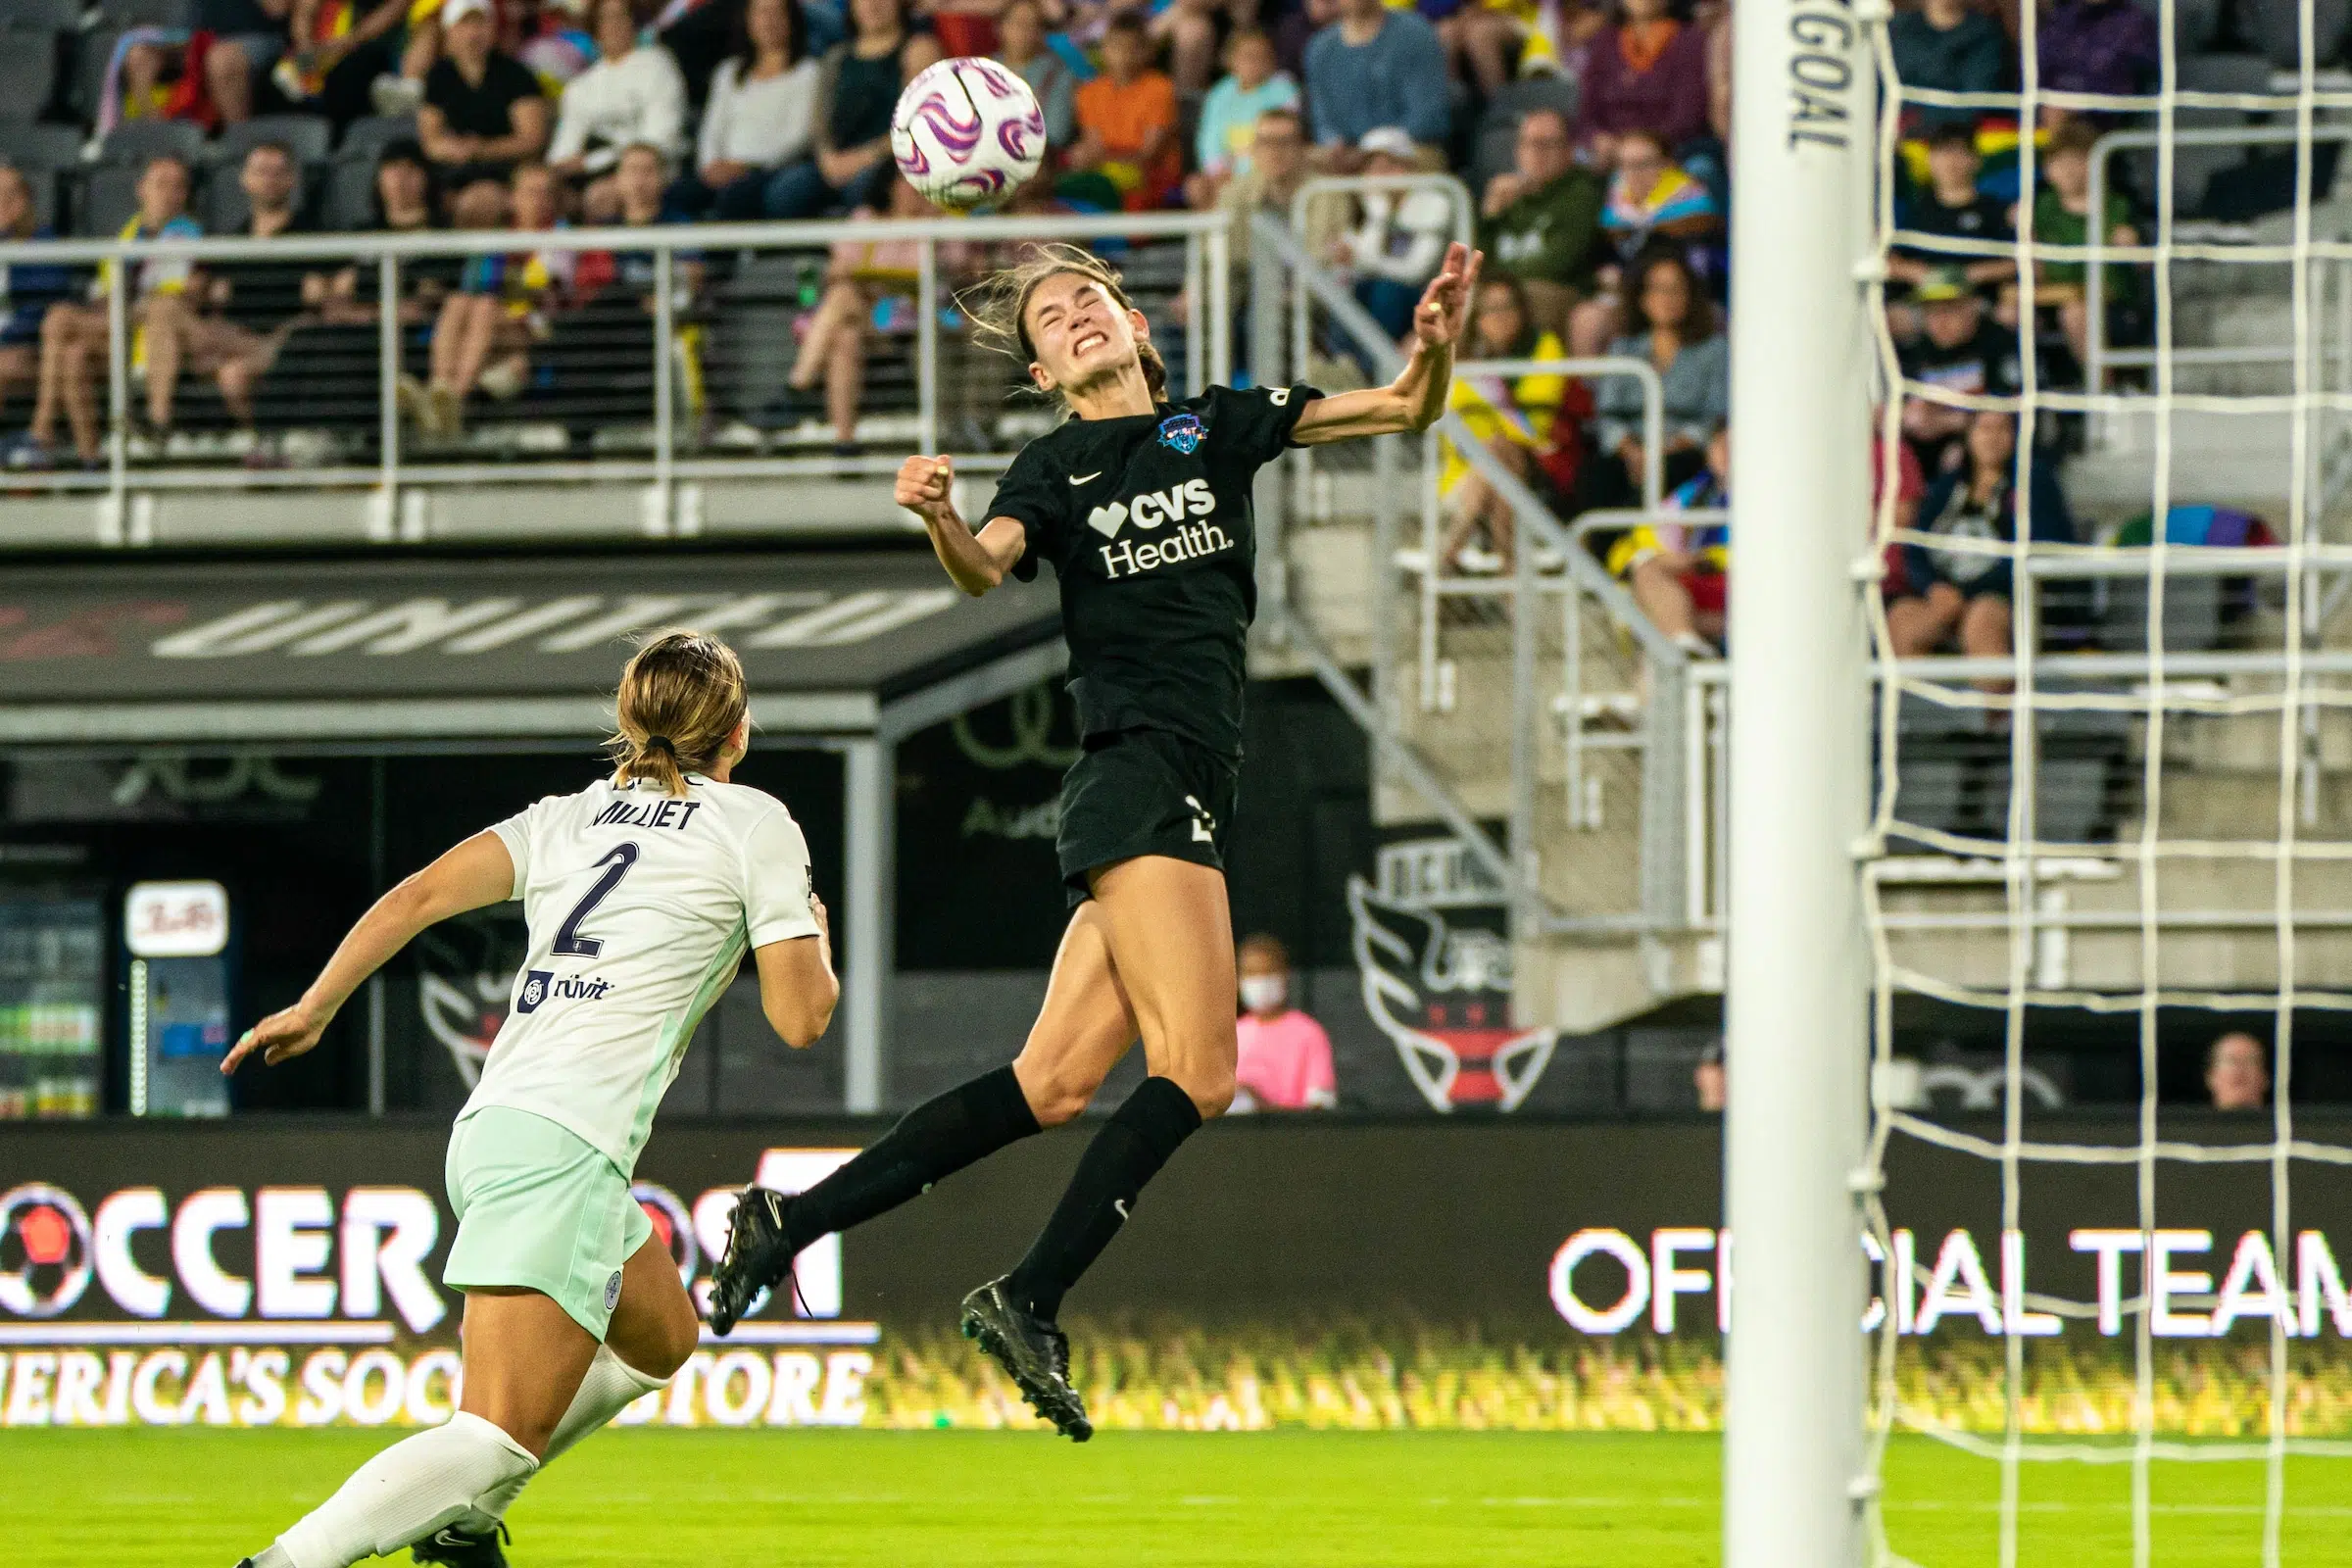 Paige Metayer in a black uniform jumps up to head a soccer ball as a defender in a light colored uniform attempts to defend her.